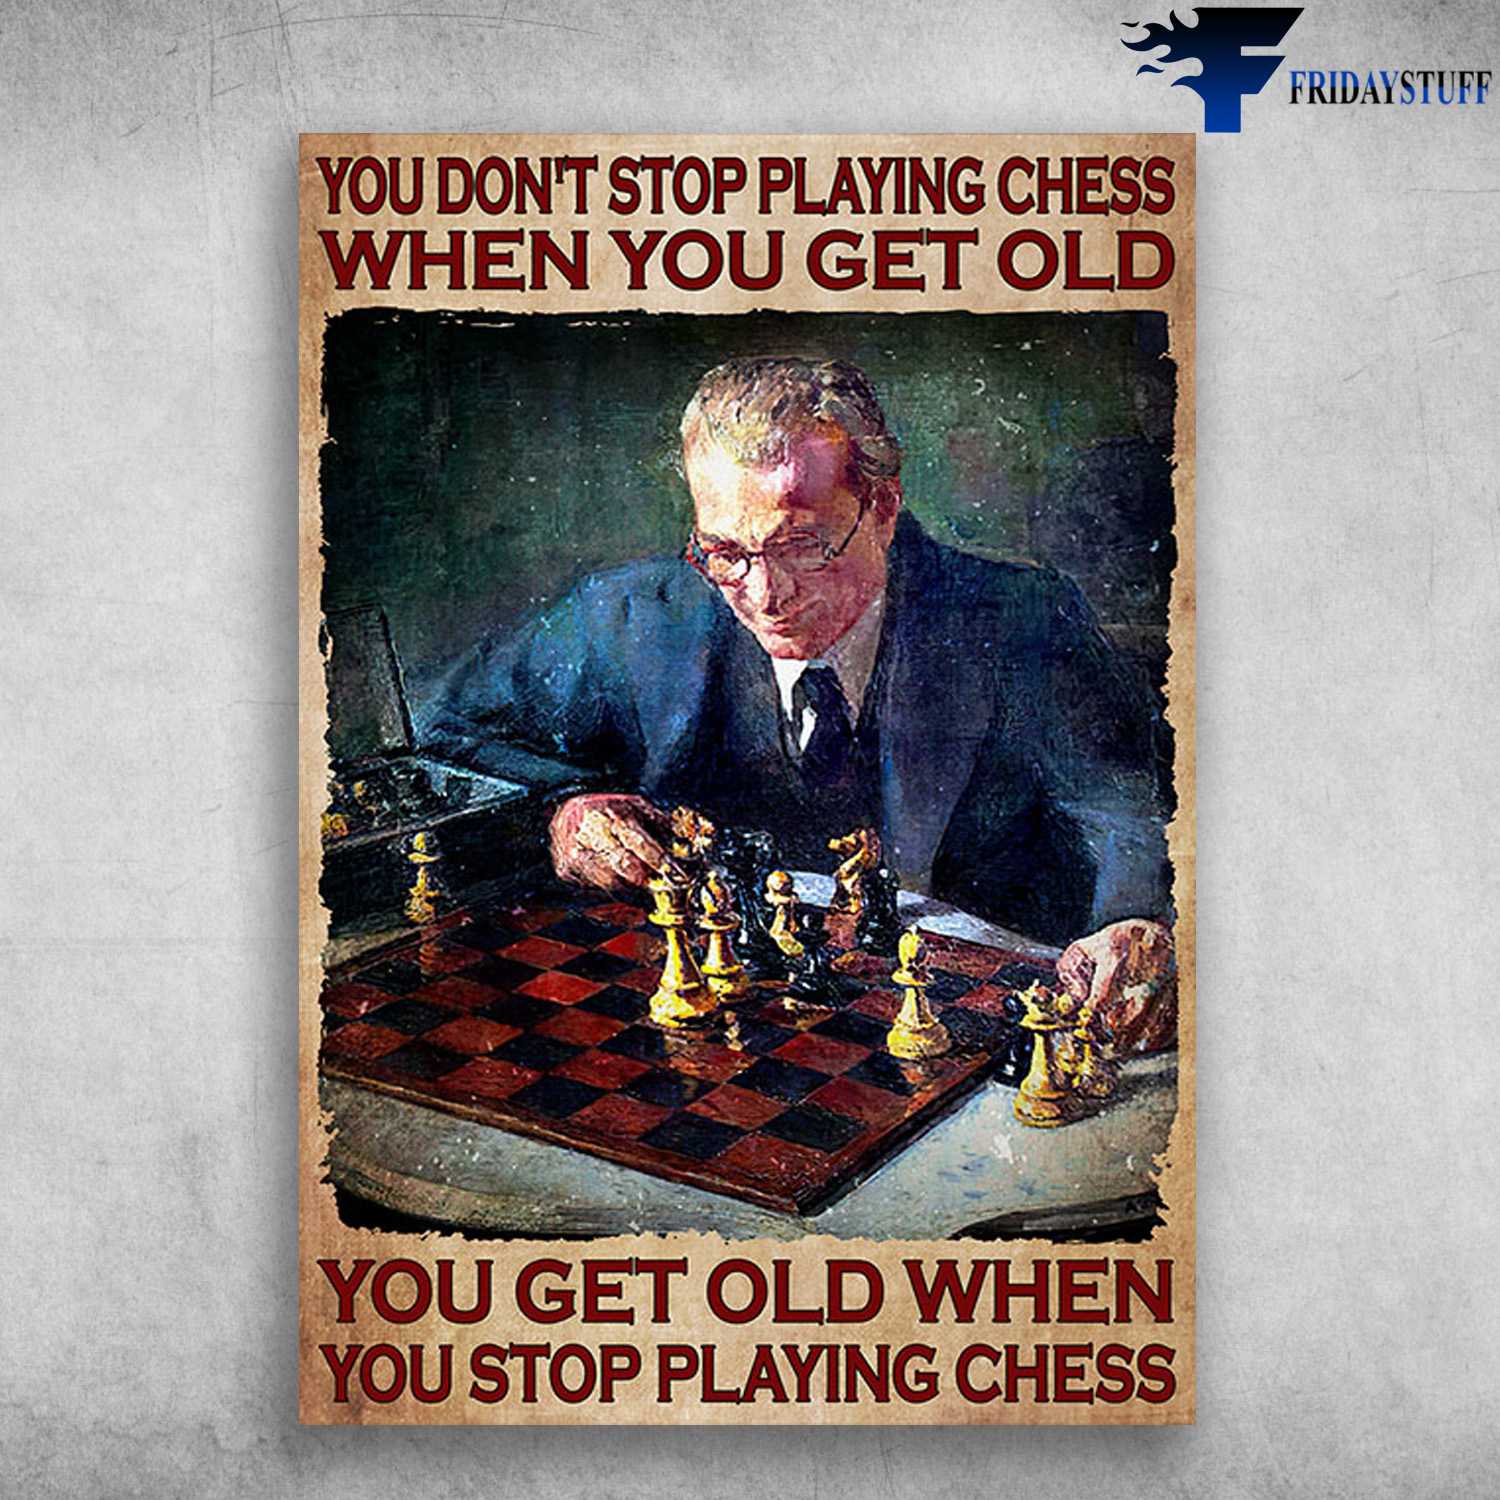 Old Man Loves Chess - You Don't Stop Playing Chess When You Get Old, You Get Old When You Stop Playing Chess